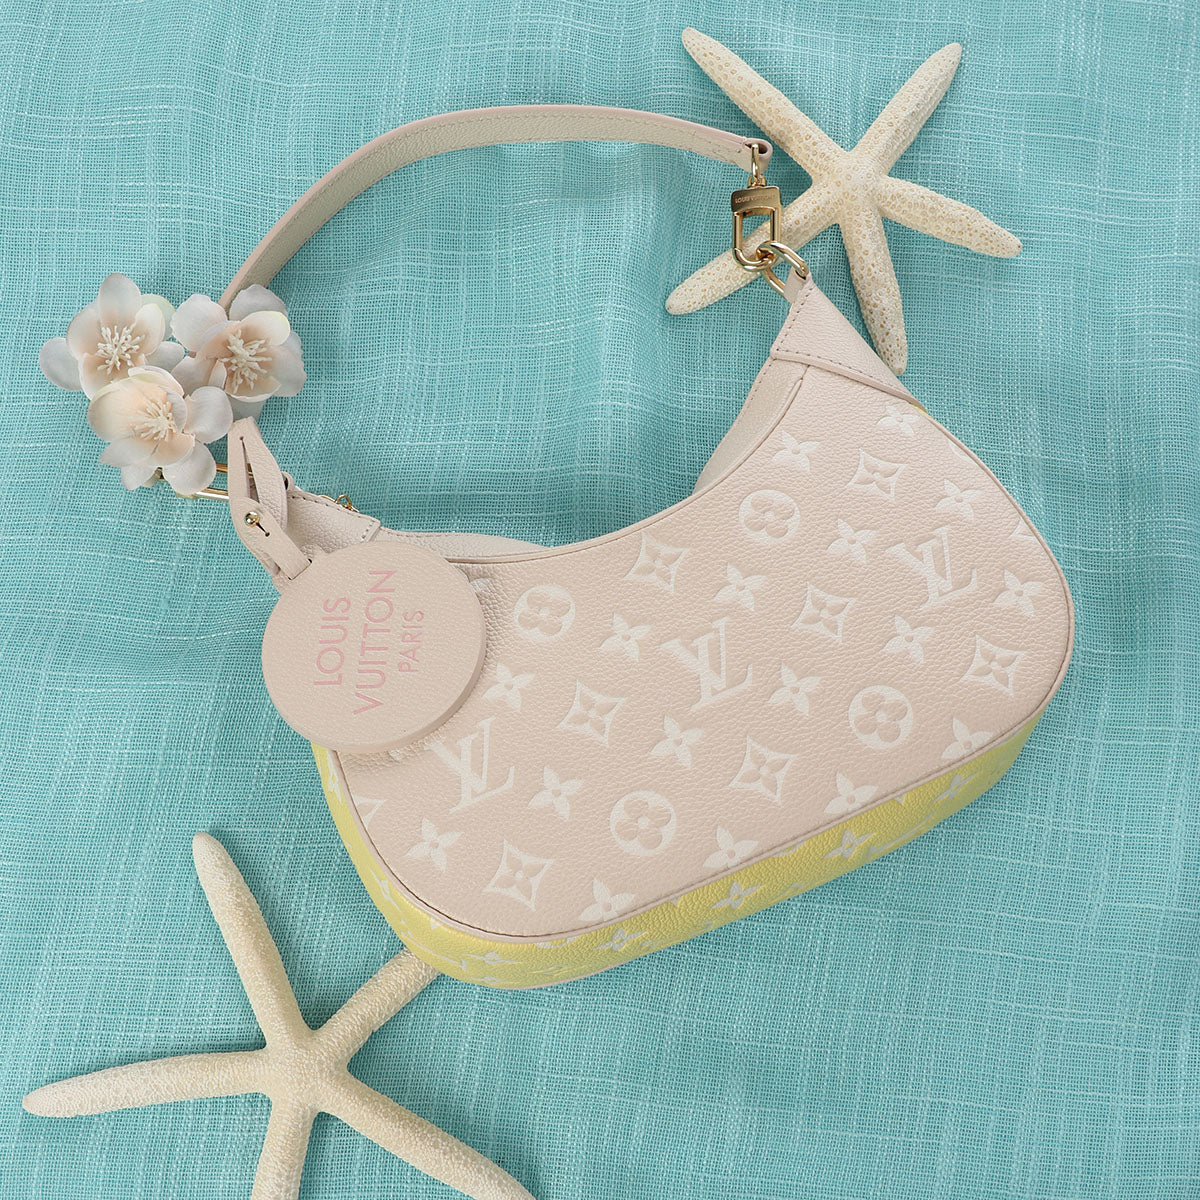 Louis Vuitton Spring in The City Bagatelle NM by Ann's Fabulous Finds